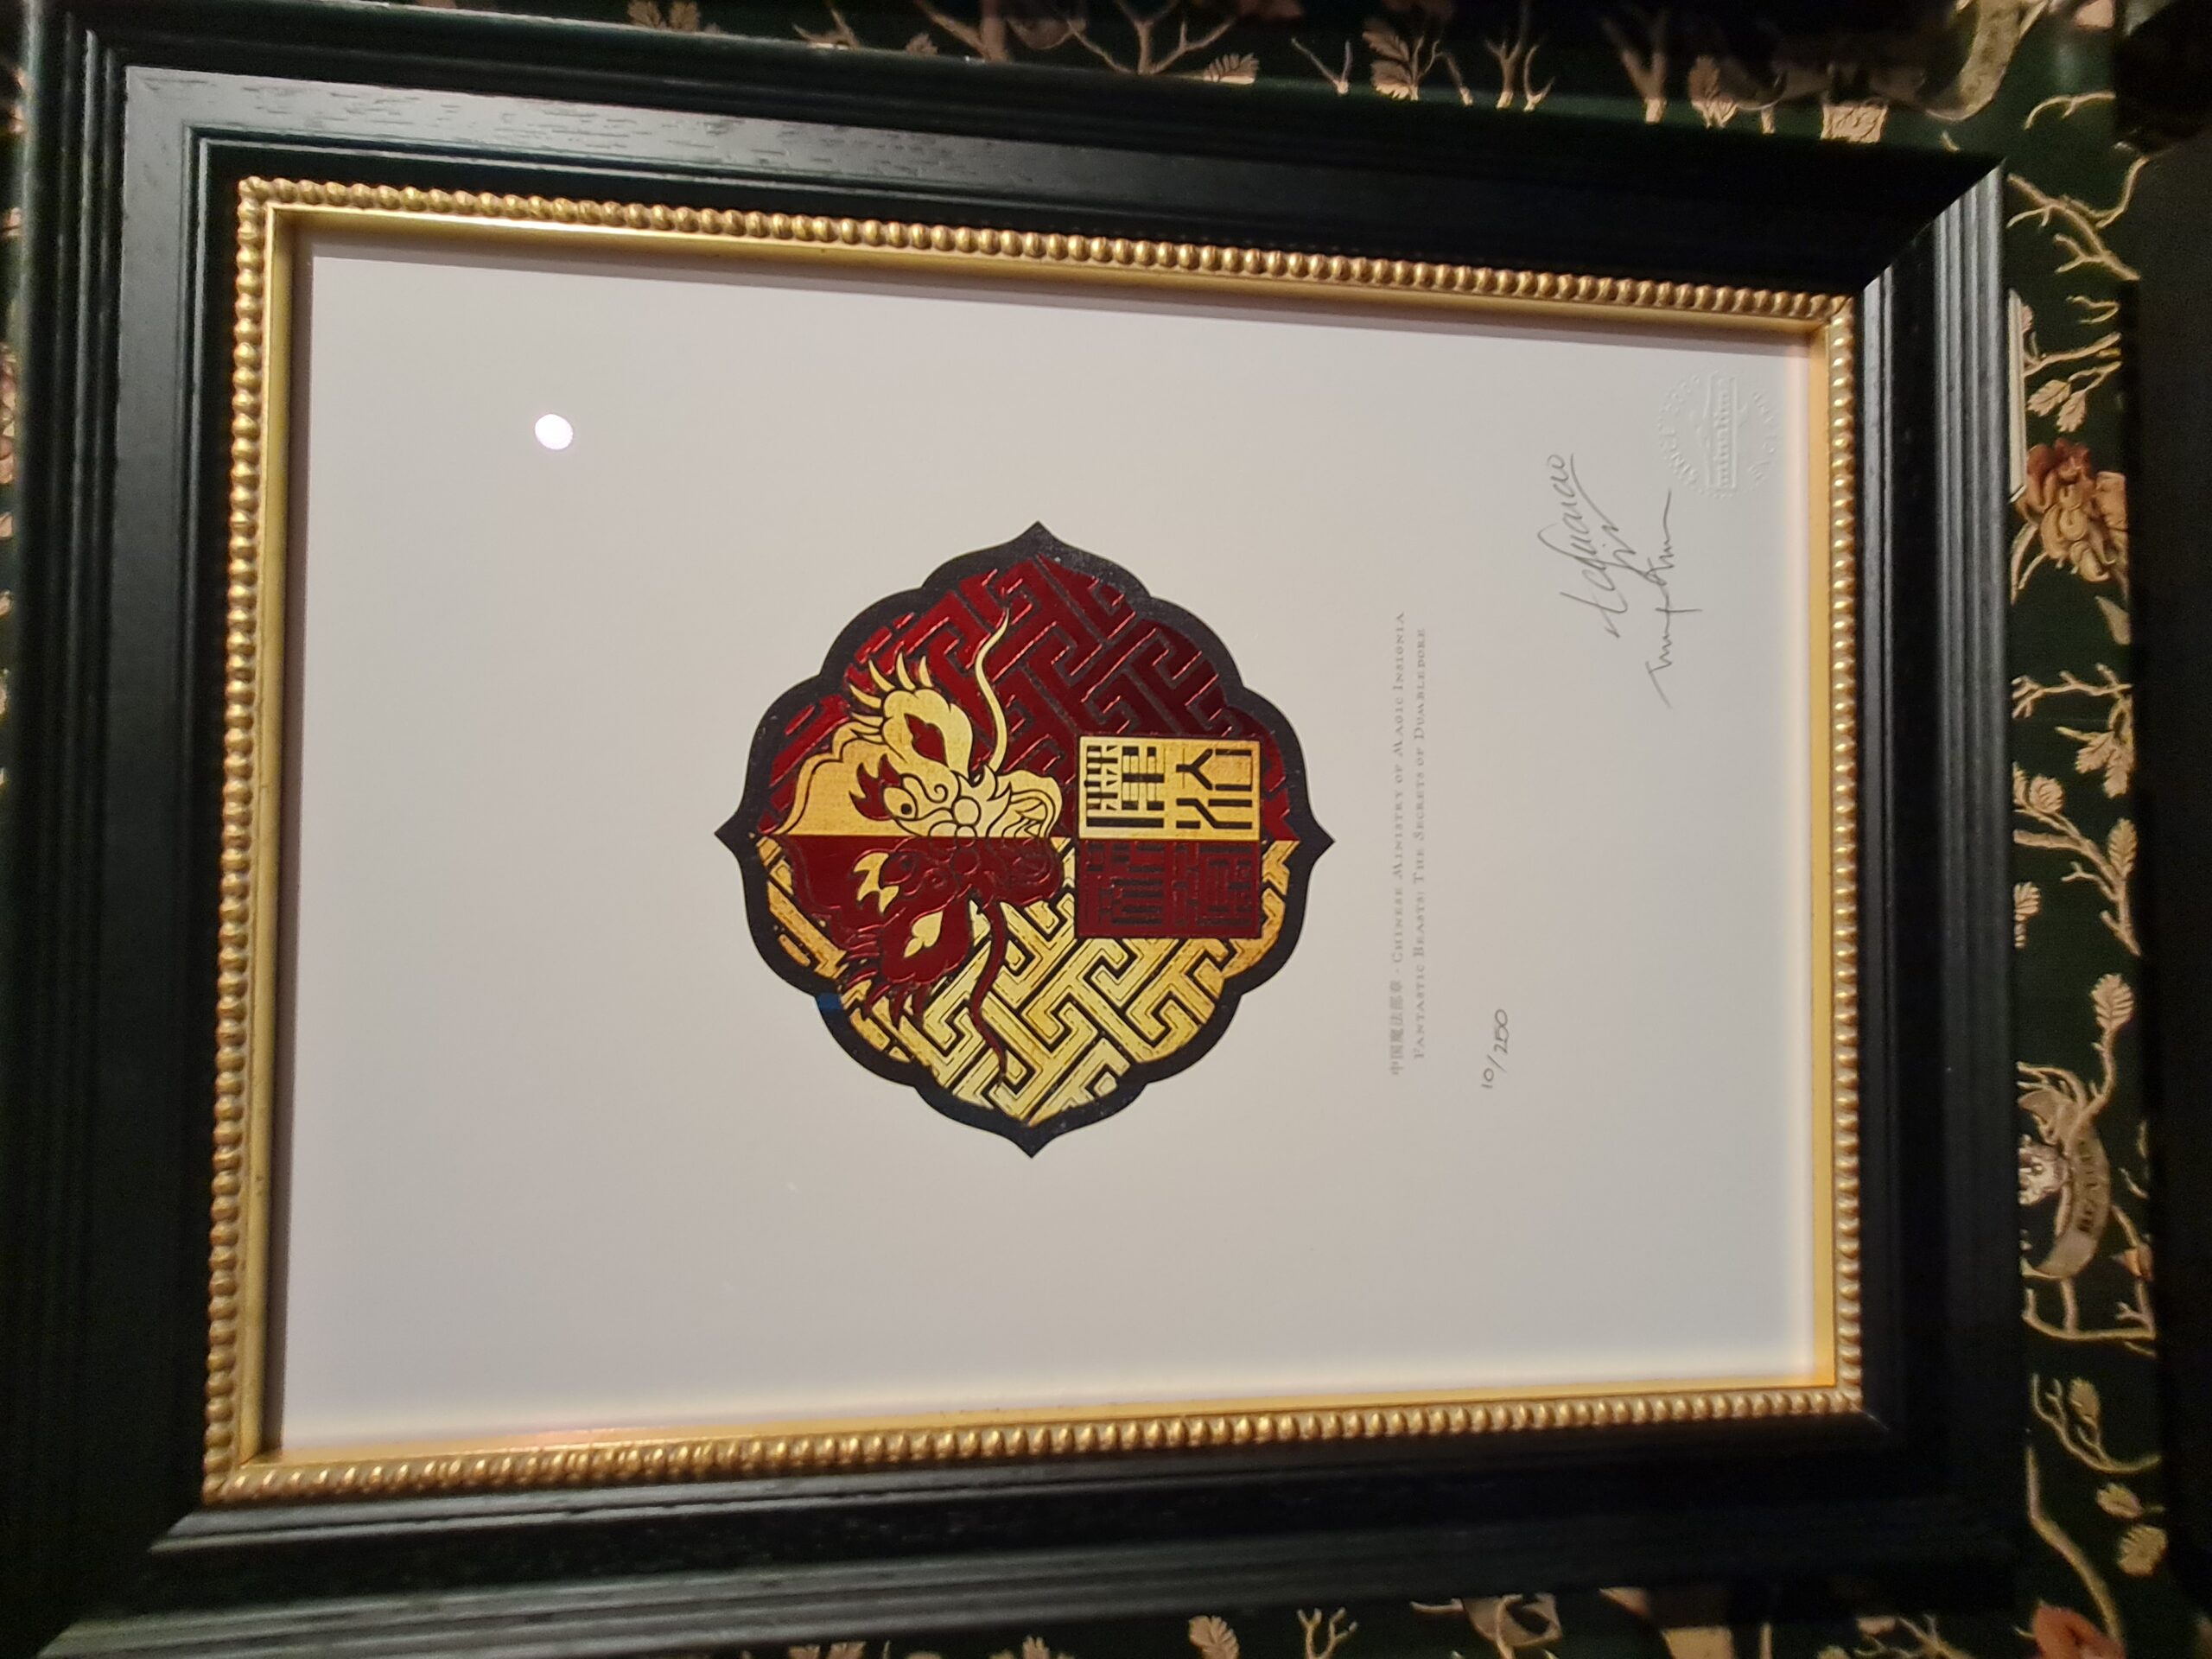 Chinese Ministry of Magic insignia designed by MinaLima.